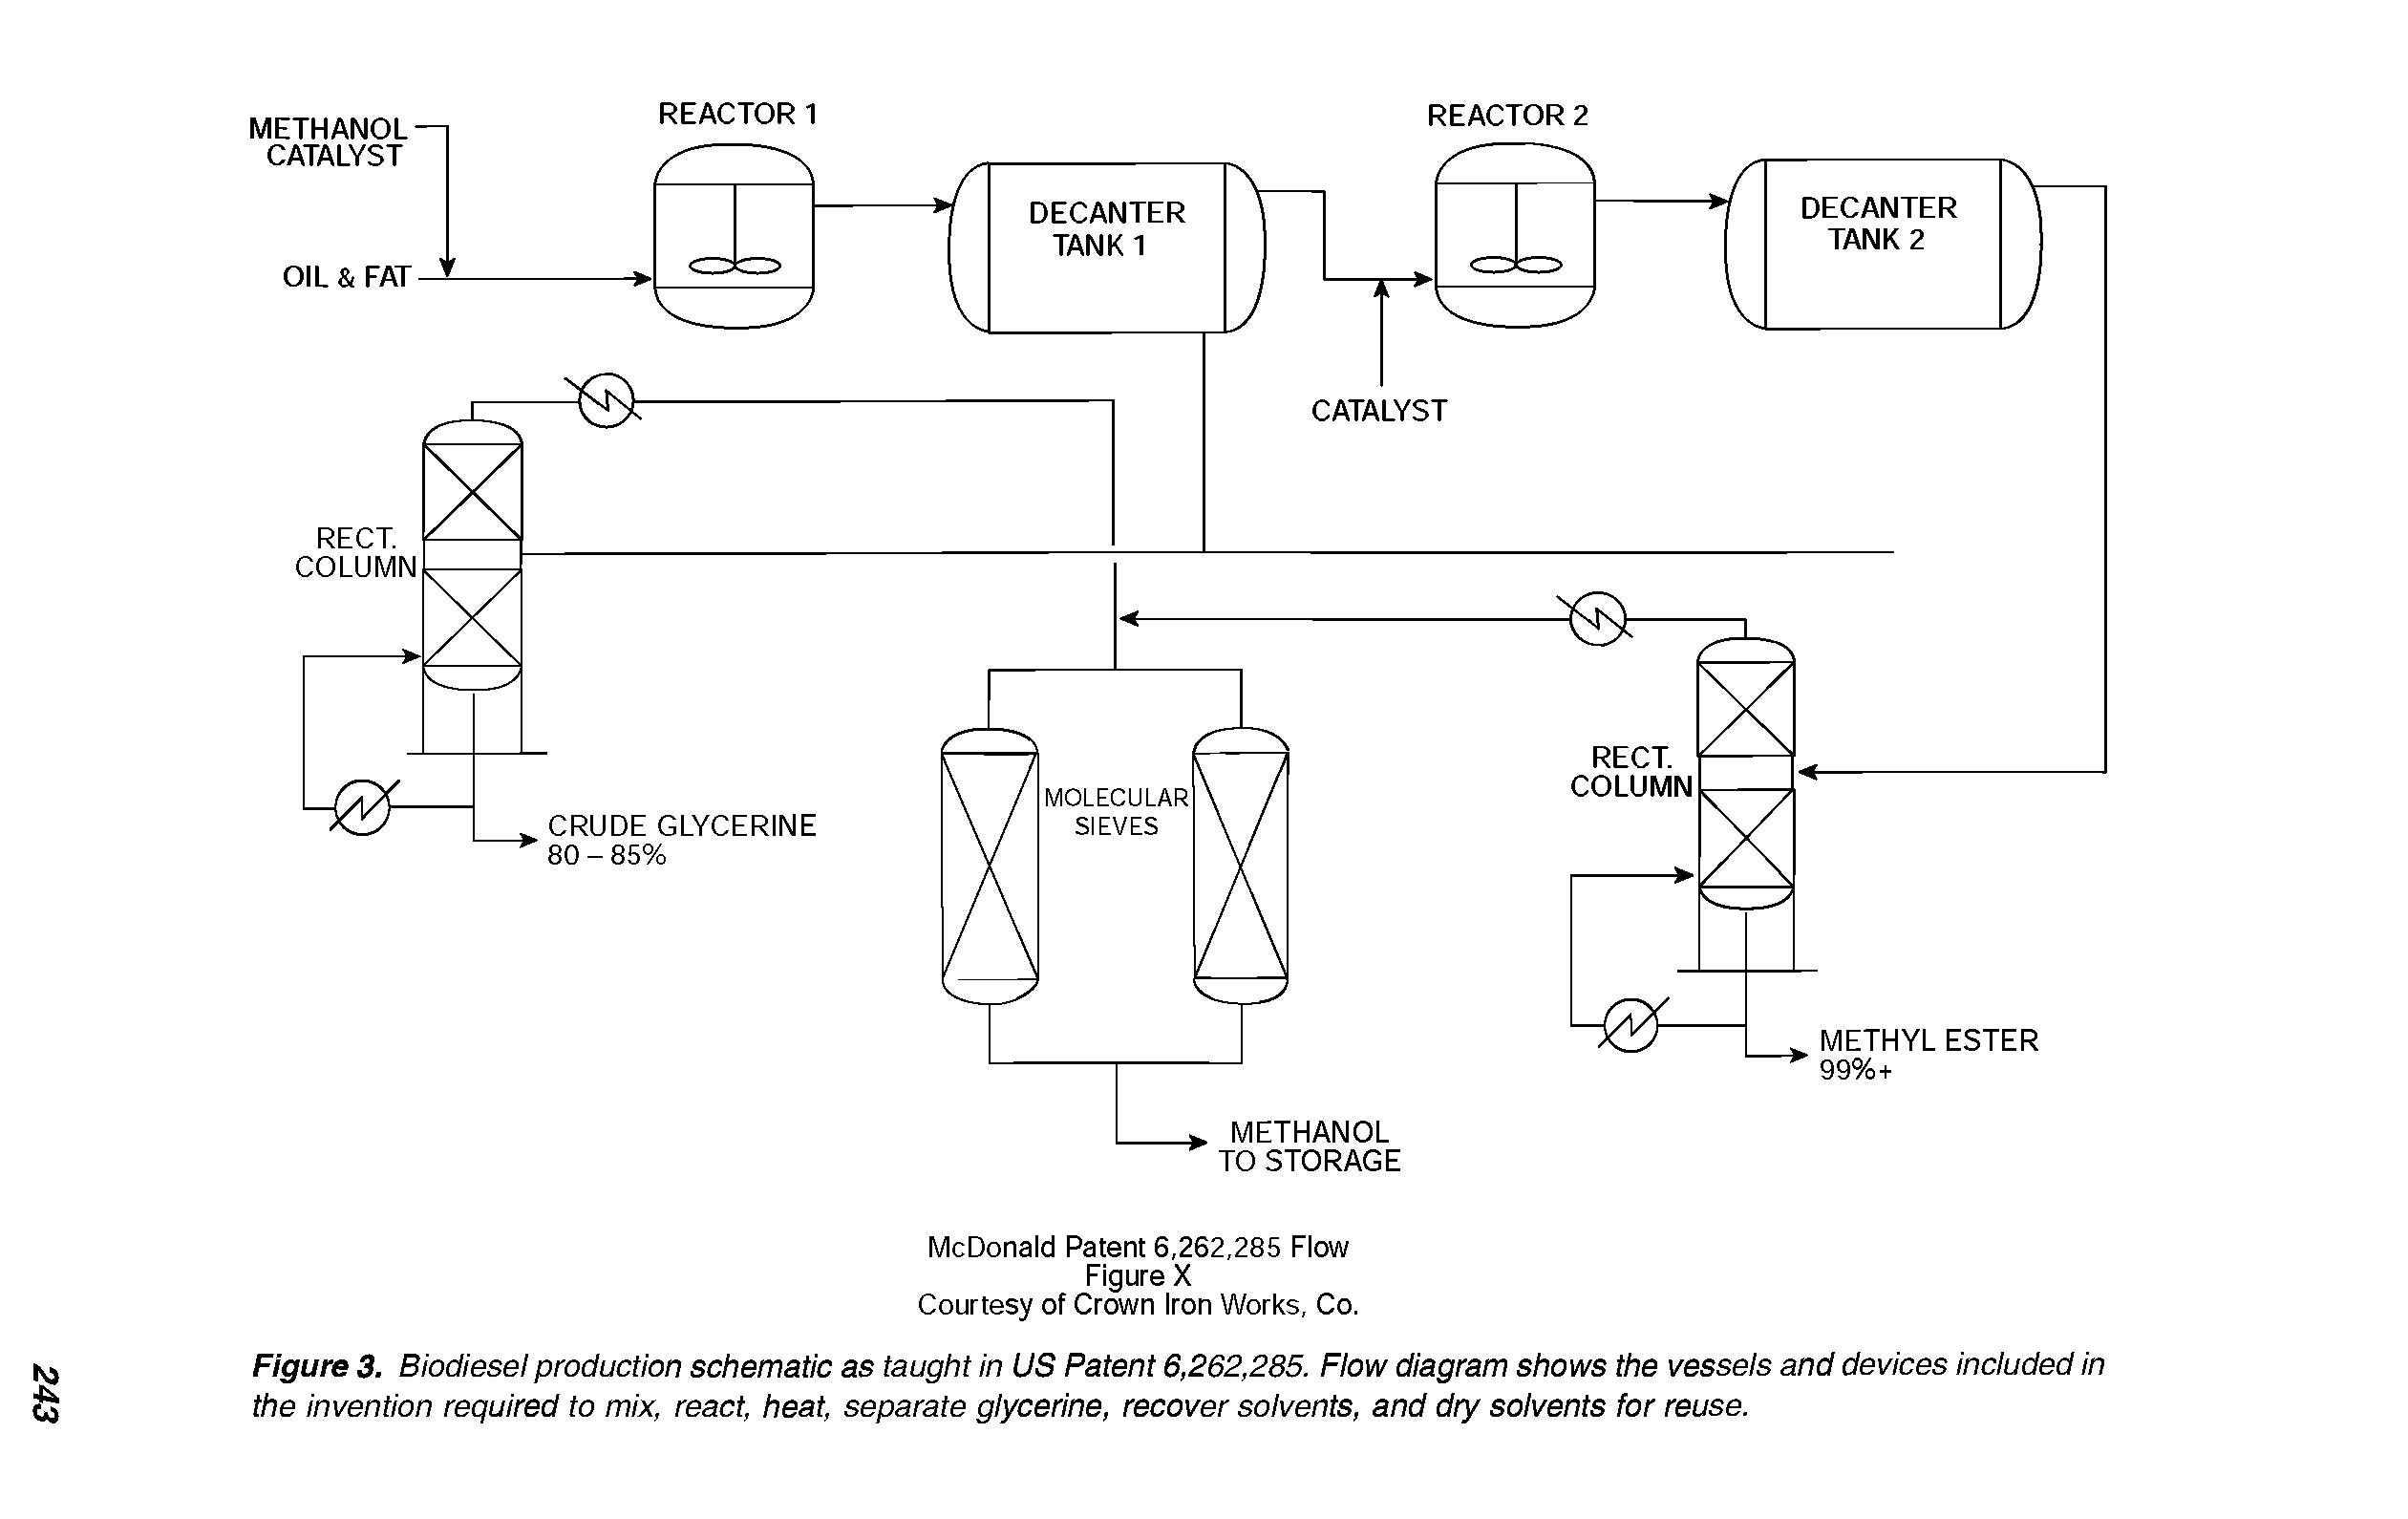 Figure 3. Biodiesel production schematic as taught in US Patent 6,262,285. Flow diagram shows the vessels and devices included in the invention required to mix, react, heat, separate glycerine, recover solvents, and dry solvents for reuse.